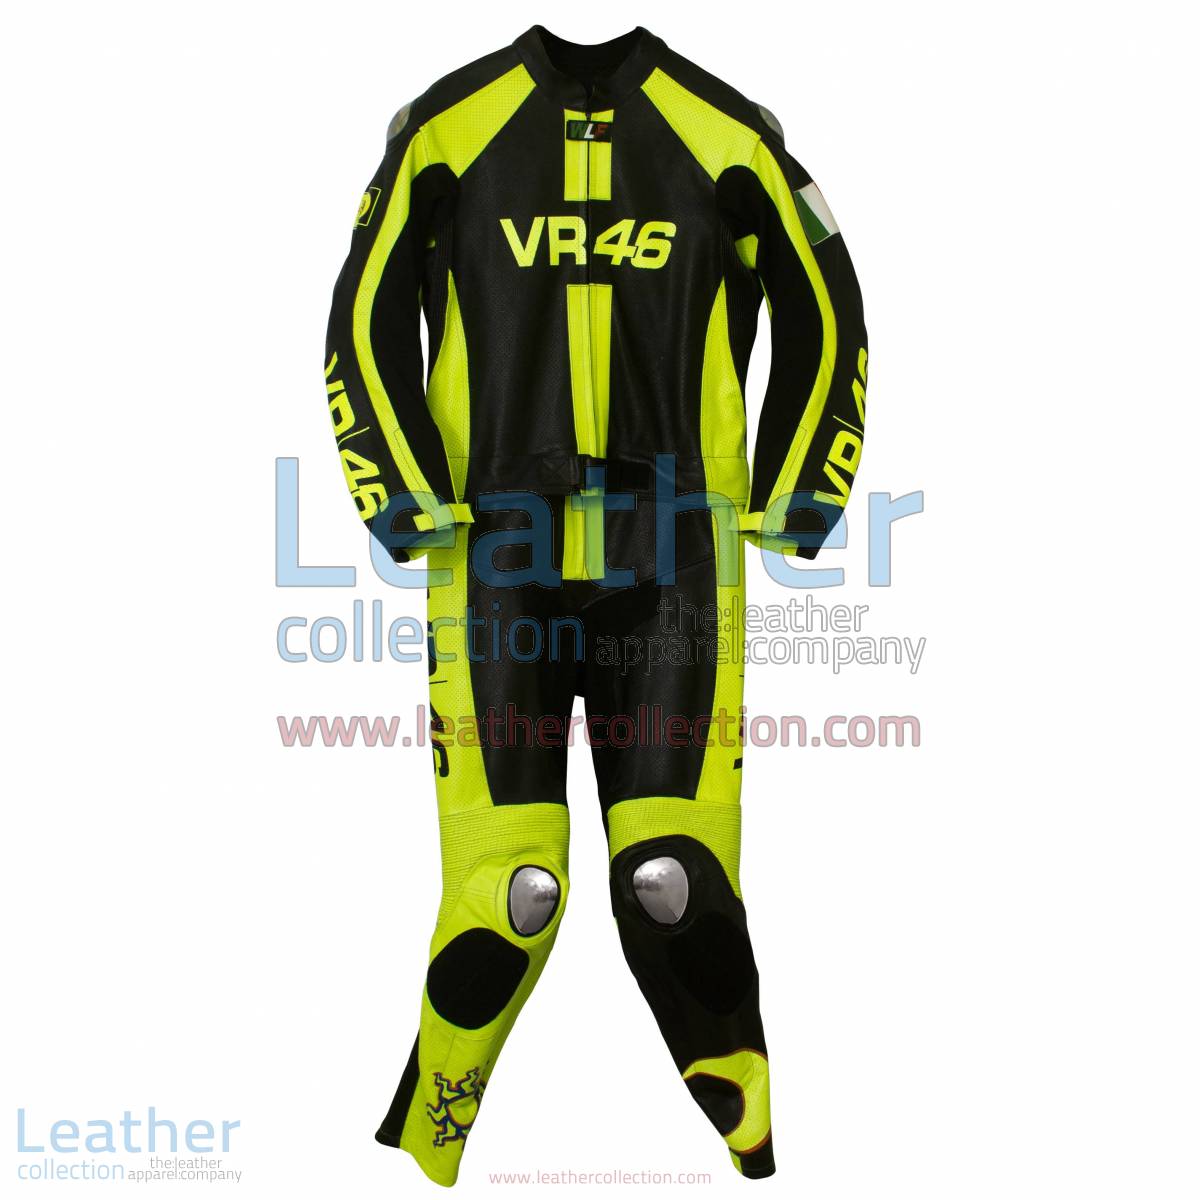 VR46 Valentino Rossi Motorcycle Race Suit | vr46,valentino rossi suit